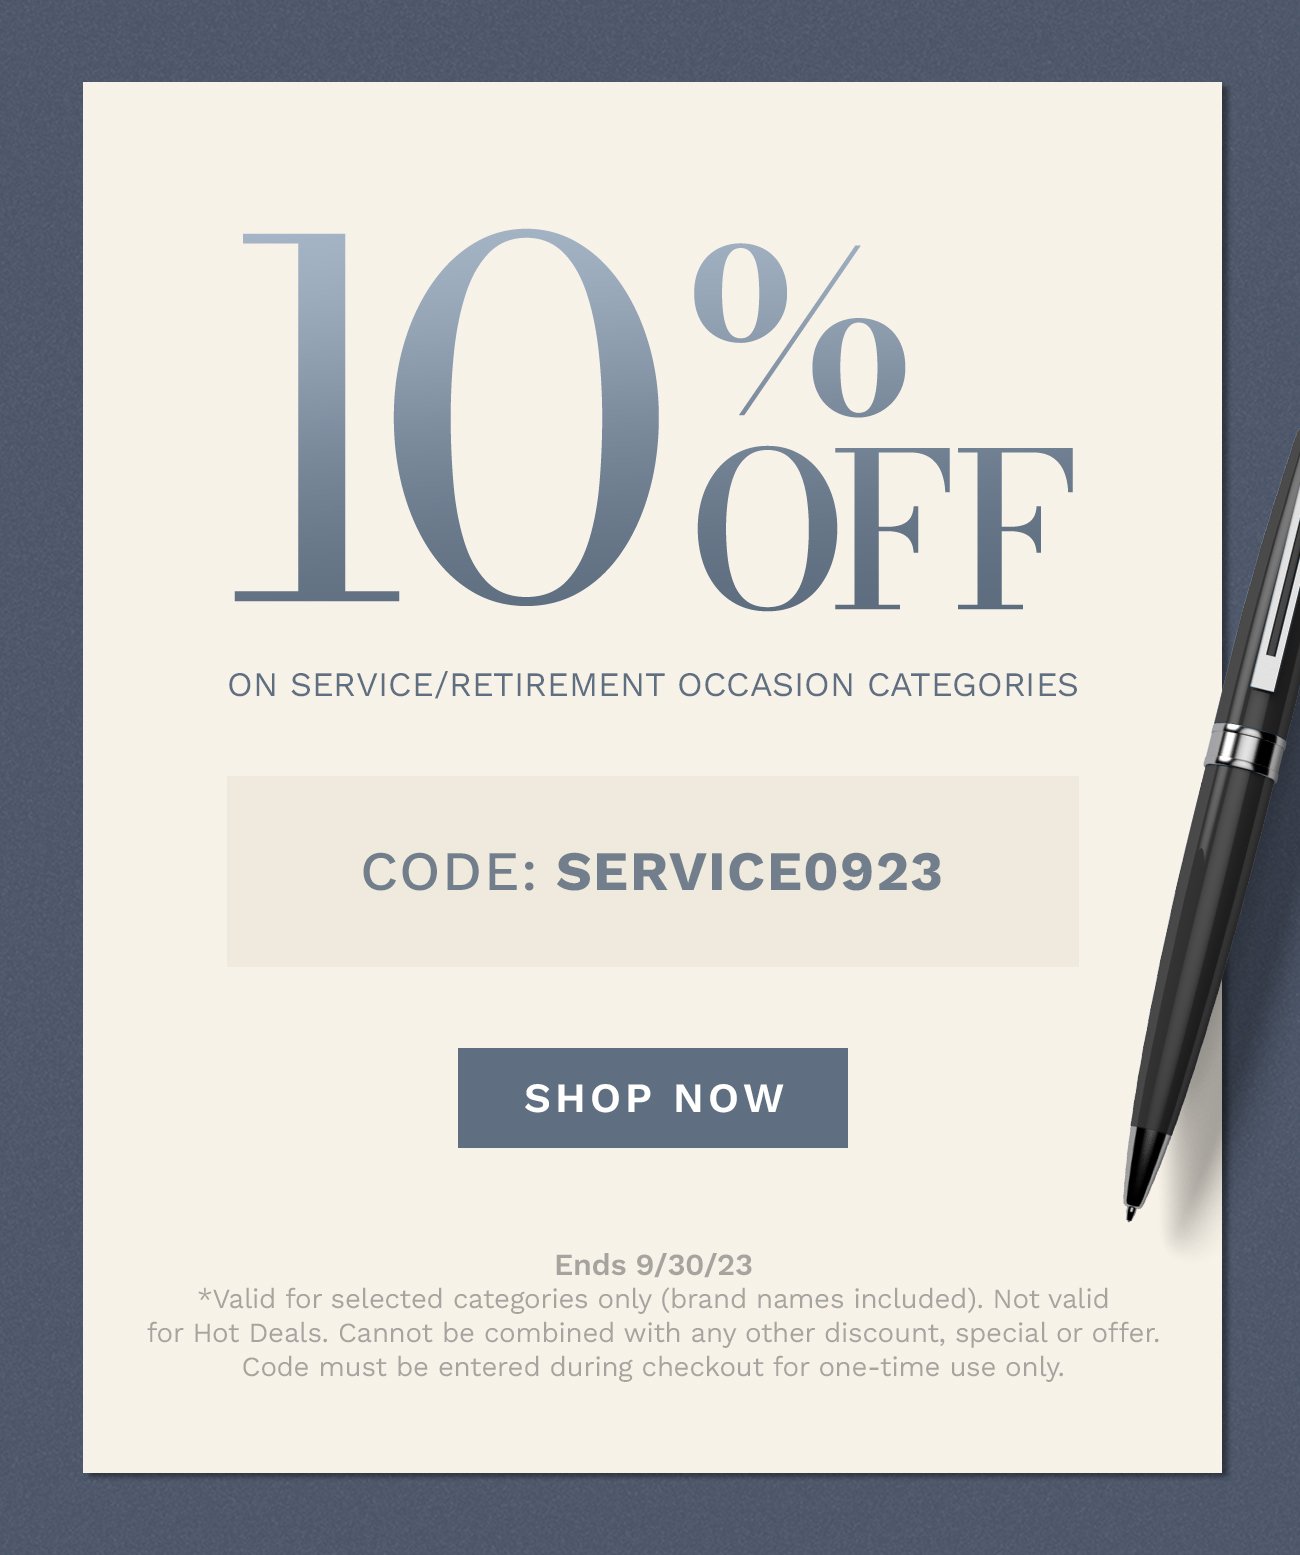 10% off on Service/Retirement occasion categories